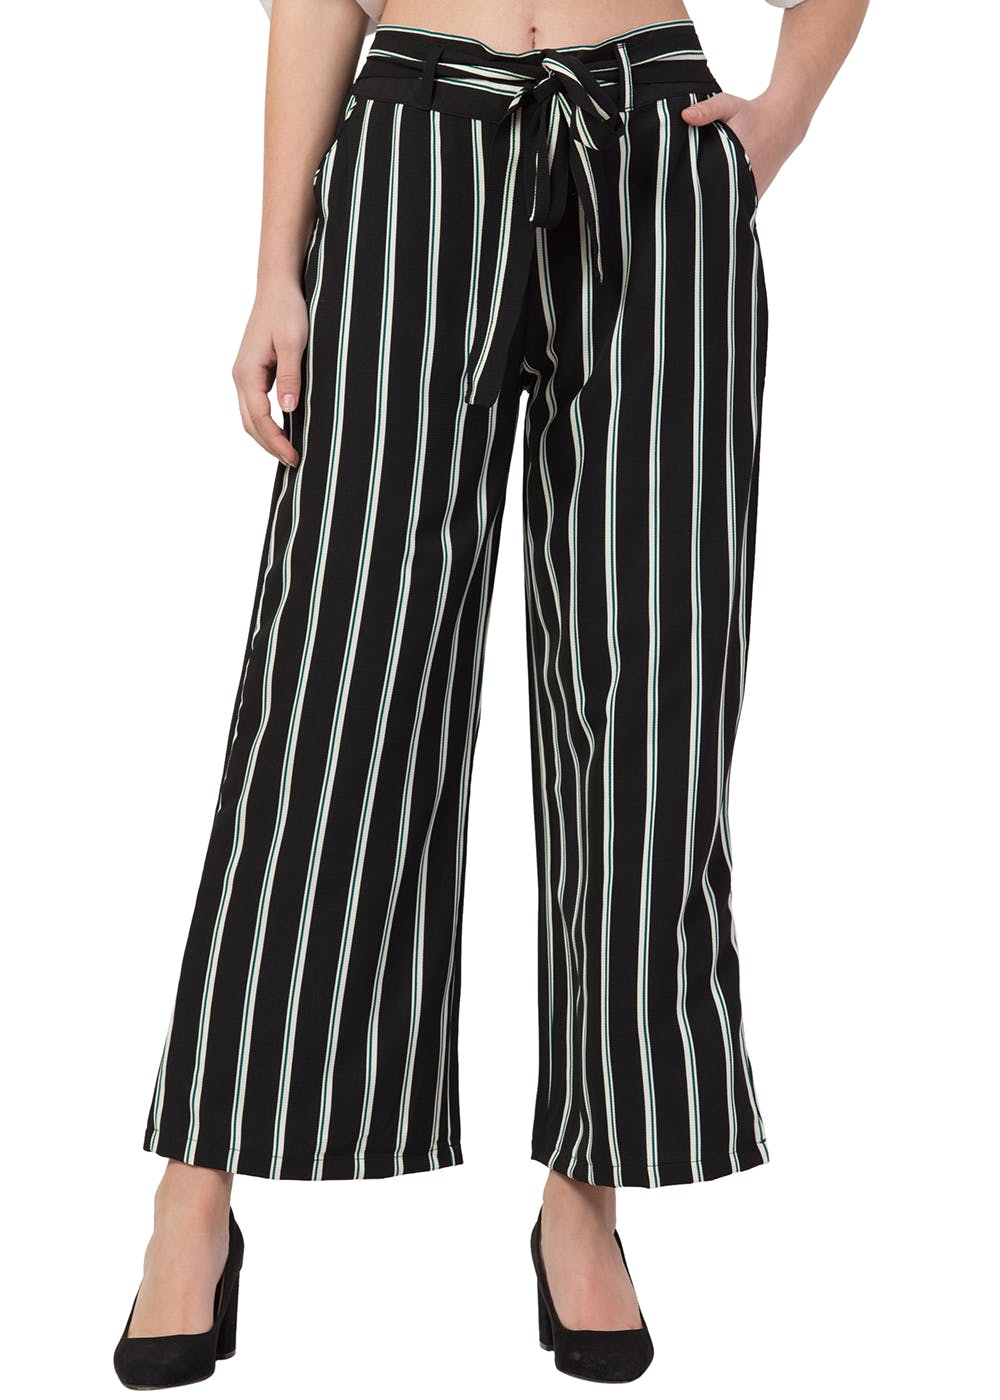 Buy Black White Stripe Palazzo Pant with Belt Handloom Cotton Block Print  Shorts for Best Price Reviews Free Shipping